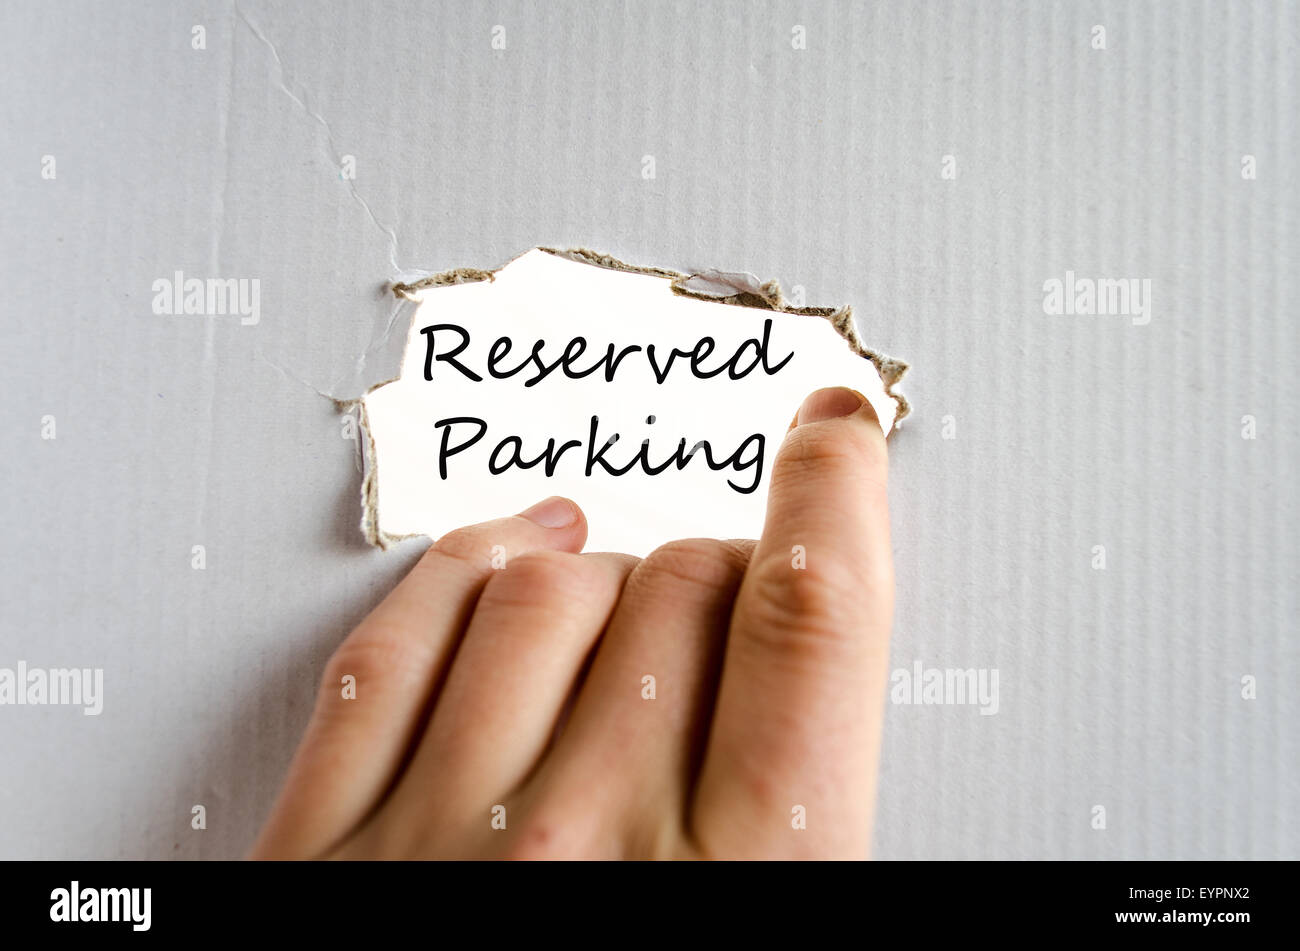 Reserved parking hand concept isolated over white background Stock Photo